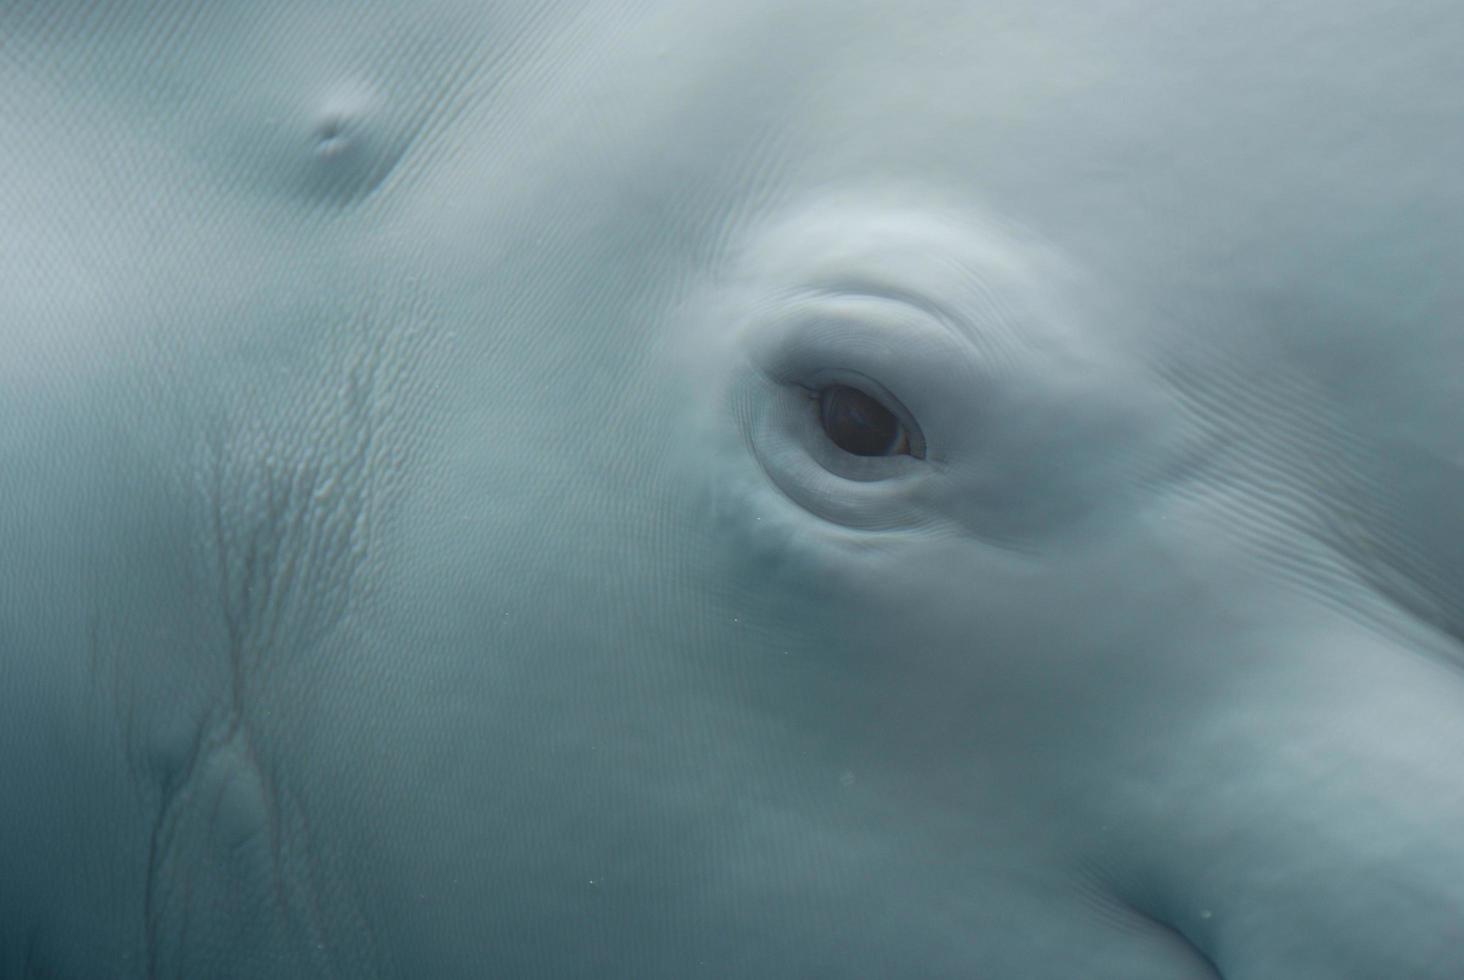 An Up Close Look at the Eye of a Beluga Whale photo